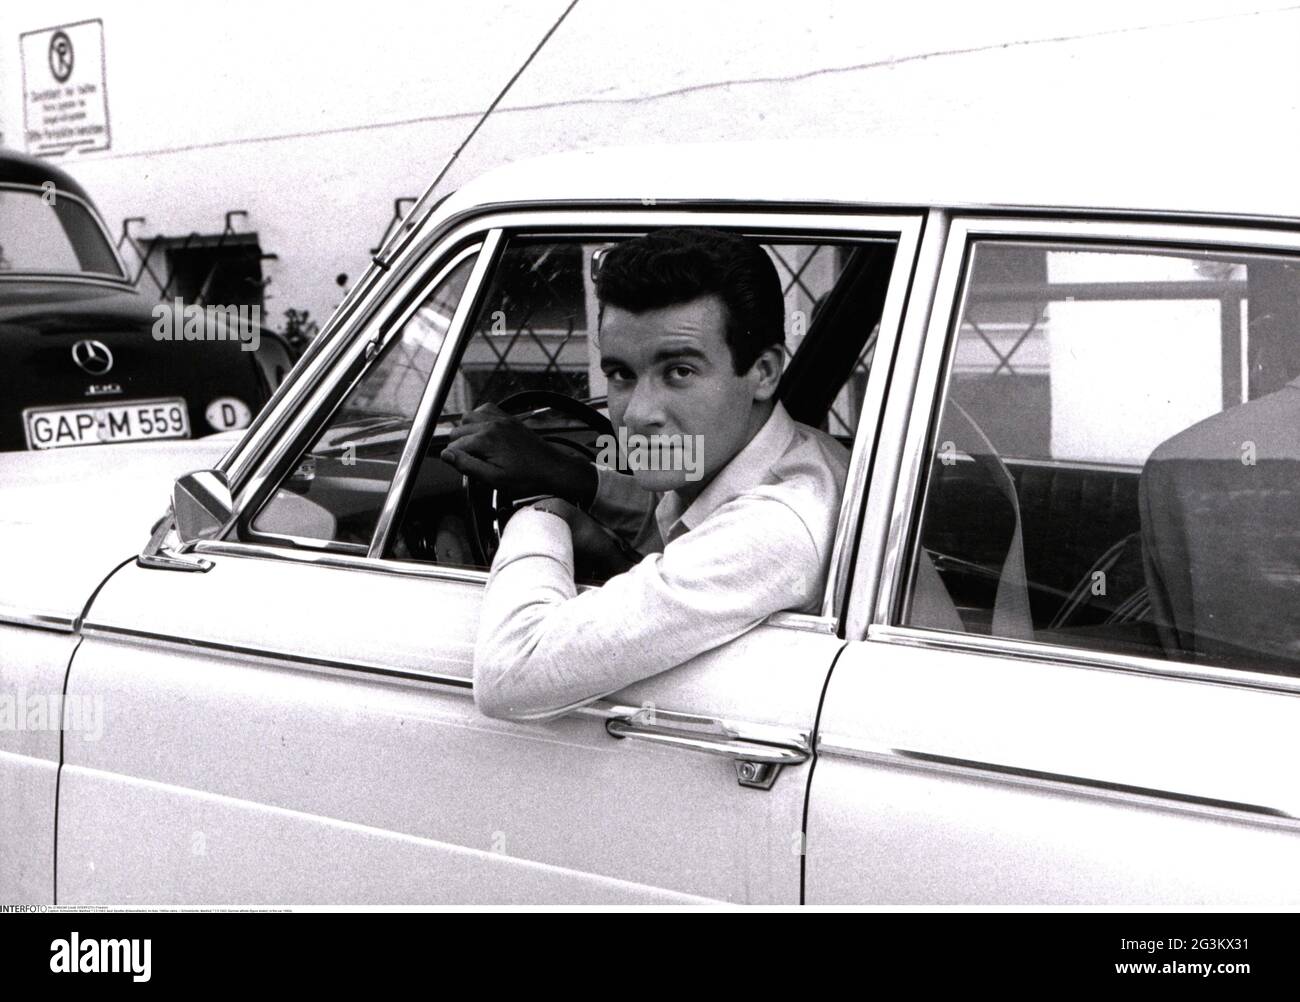 Schnelldorfer, Manfred, * 2.5.1943, German athlete (figure skater), in the car, 1960s, ADDITIONAL-RIGHTS-CLEARANCE-INFO-NOT-AVAILABLE Stock Photo